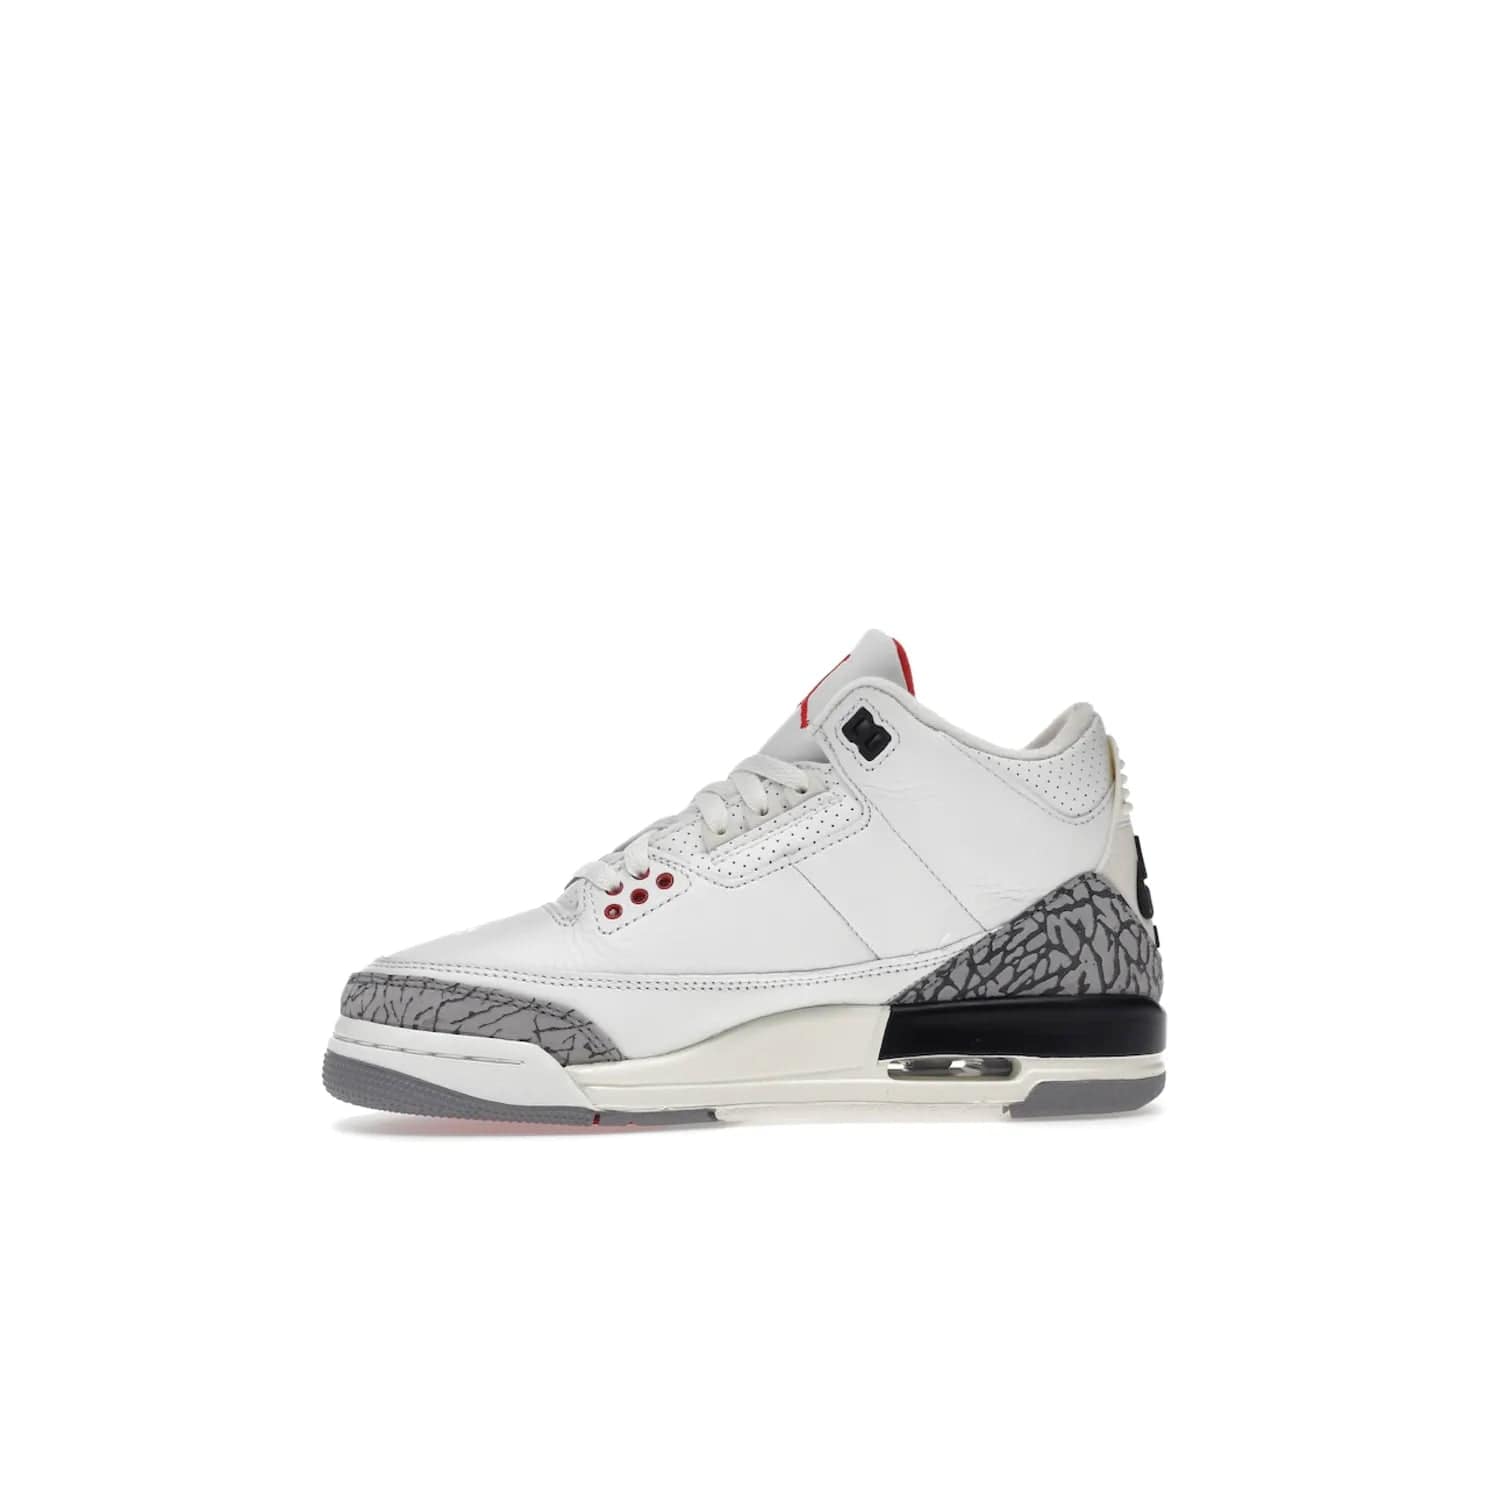 Jordan 3 Retro White Cement Reimagined (GS) - Image 18 - Only at www.BallersClubKickz.com - Grab the perfect blend of modern design and classic style with the Jordan 3 Retro White Cement Reimagined (GS). Features Summit White, Fire Red, Black, and Cement Grey colorway, iconic Jordan logo embroidered on the tongue, and “Nike Air” branding. Limited availability, get your pair before March 11th 2023.